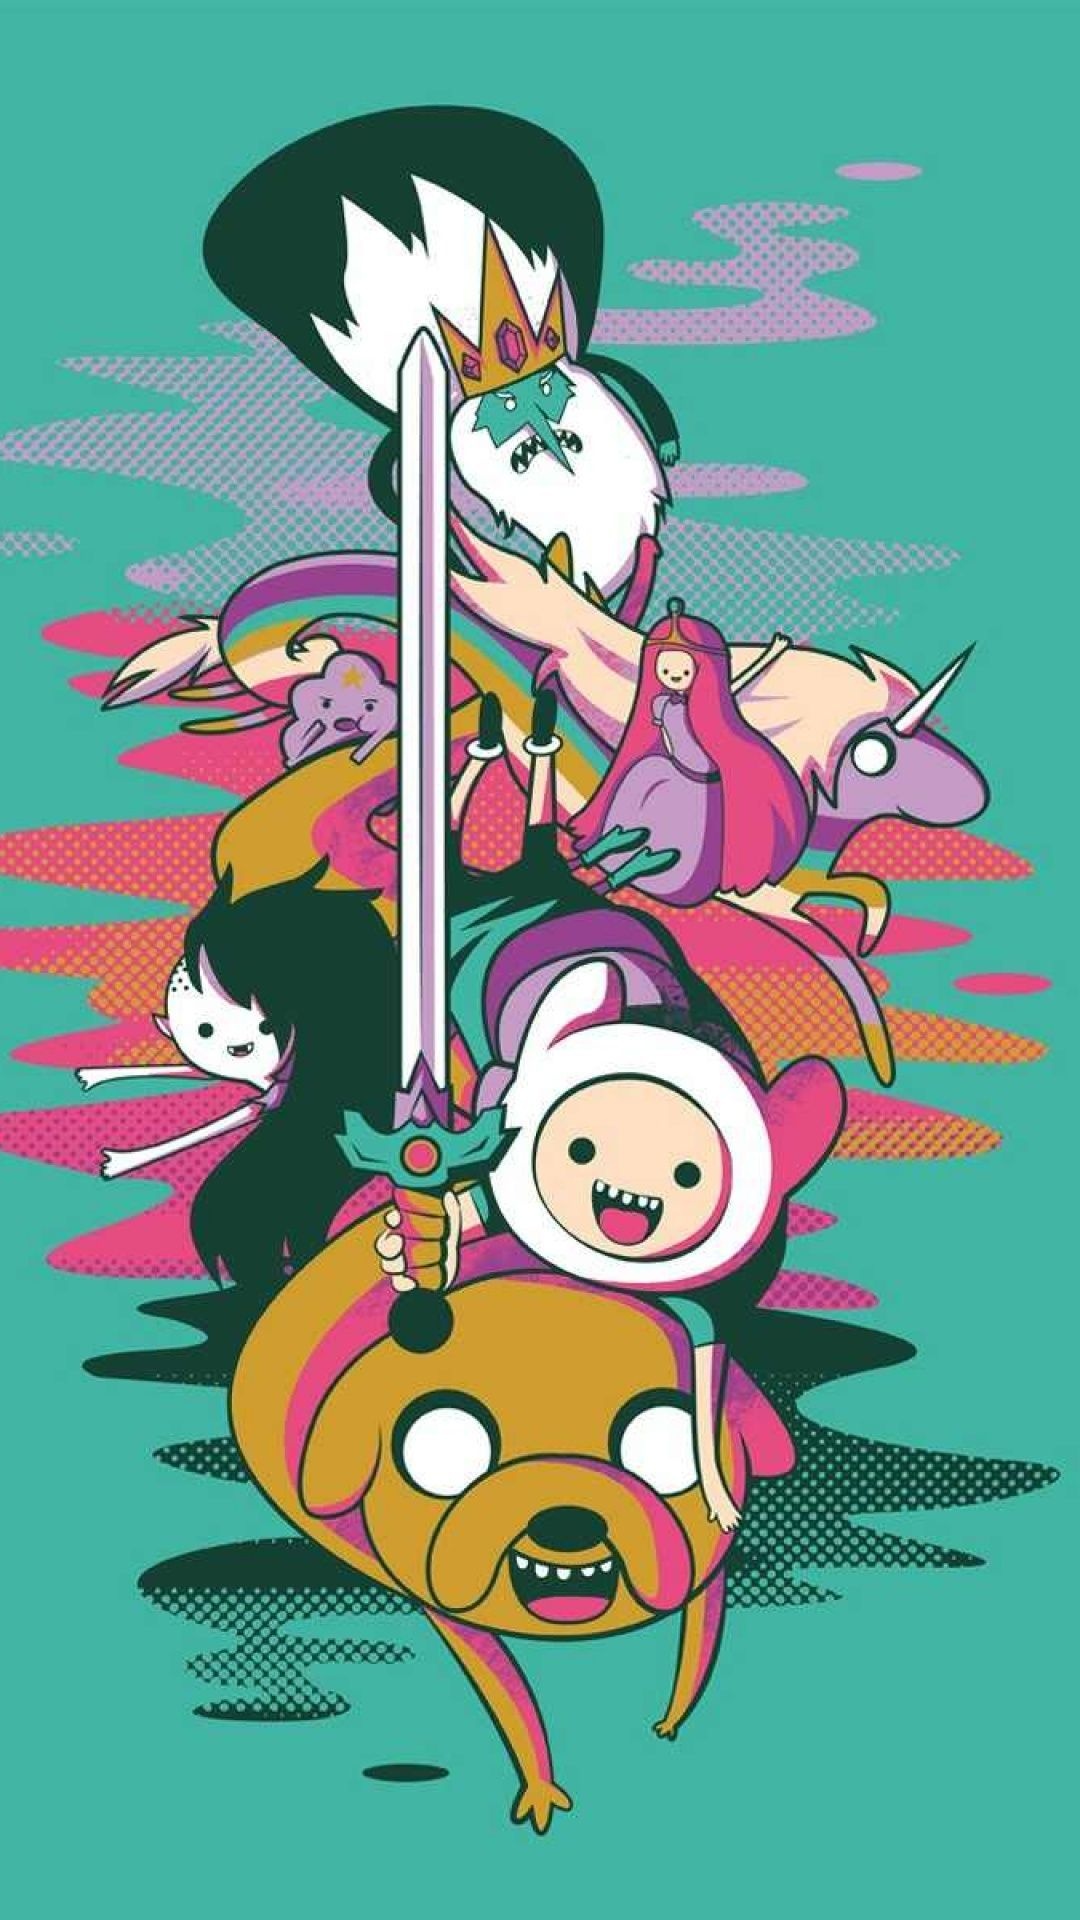 Adventure Time wallpapers, Animated series, Cartoon characters, Adventure Time art, 1080x1920 Full HD Handy